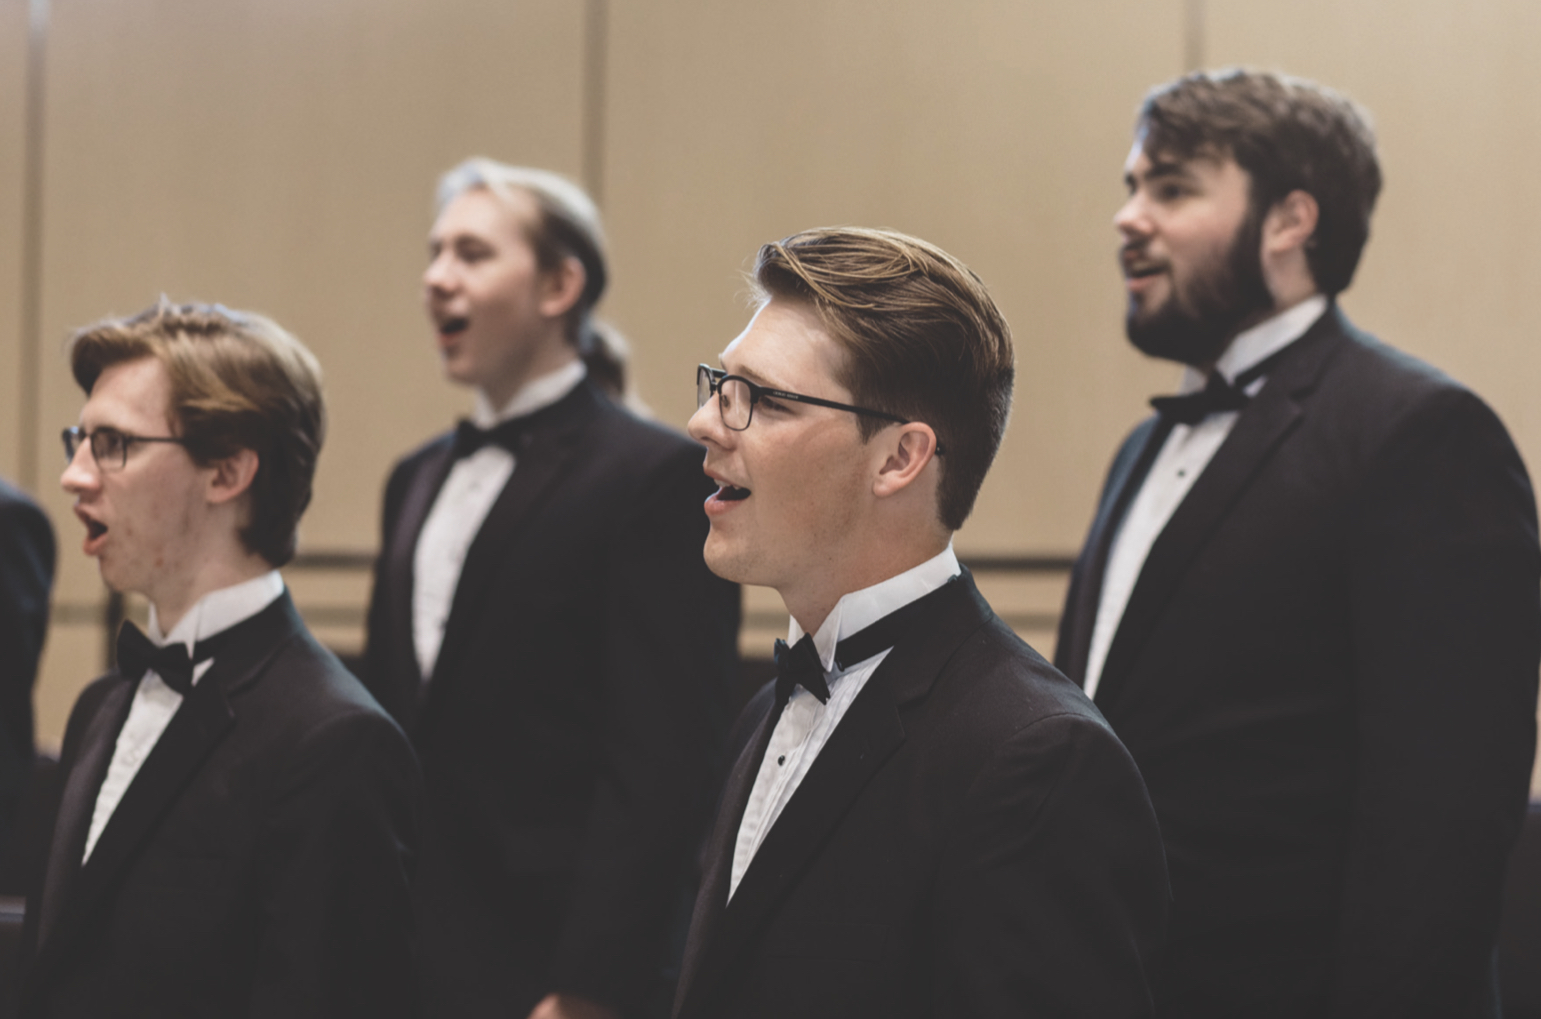 Concordia's Men's Chorus is ready to delight audiences on Feb. 10 with their light hearted songs and dances.